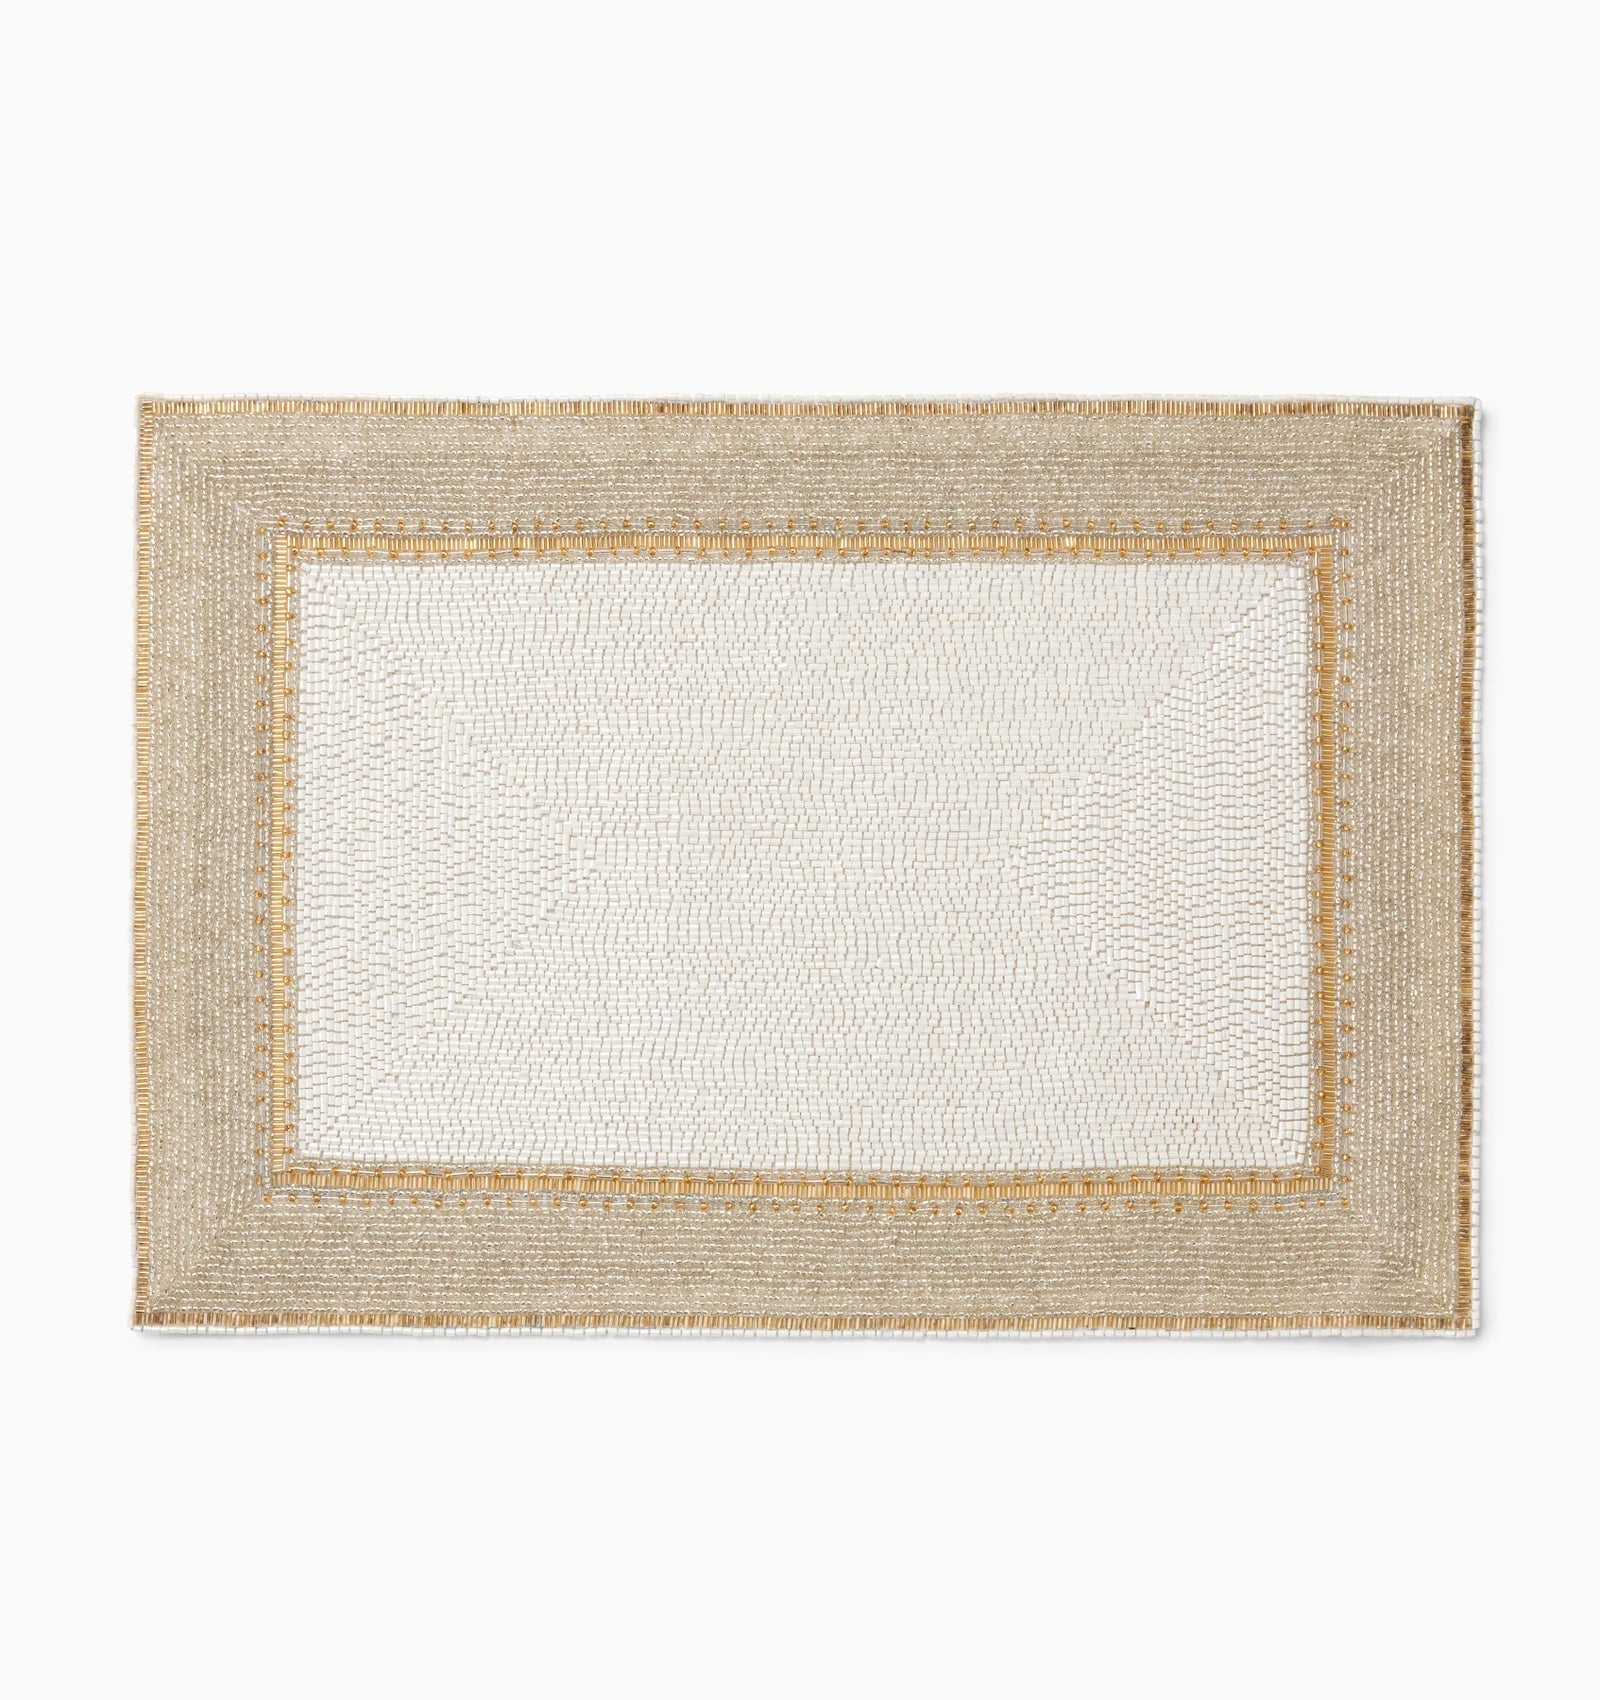 Perlina Placemats